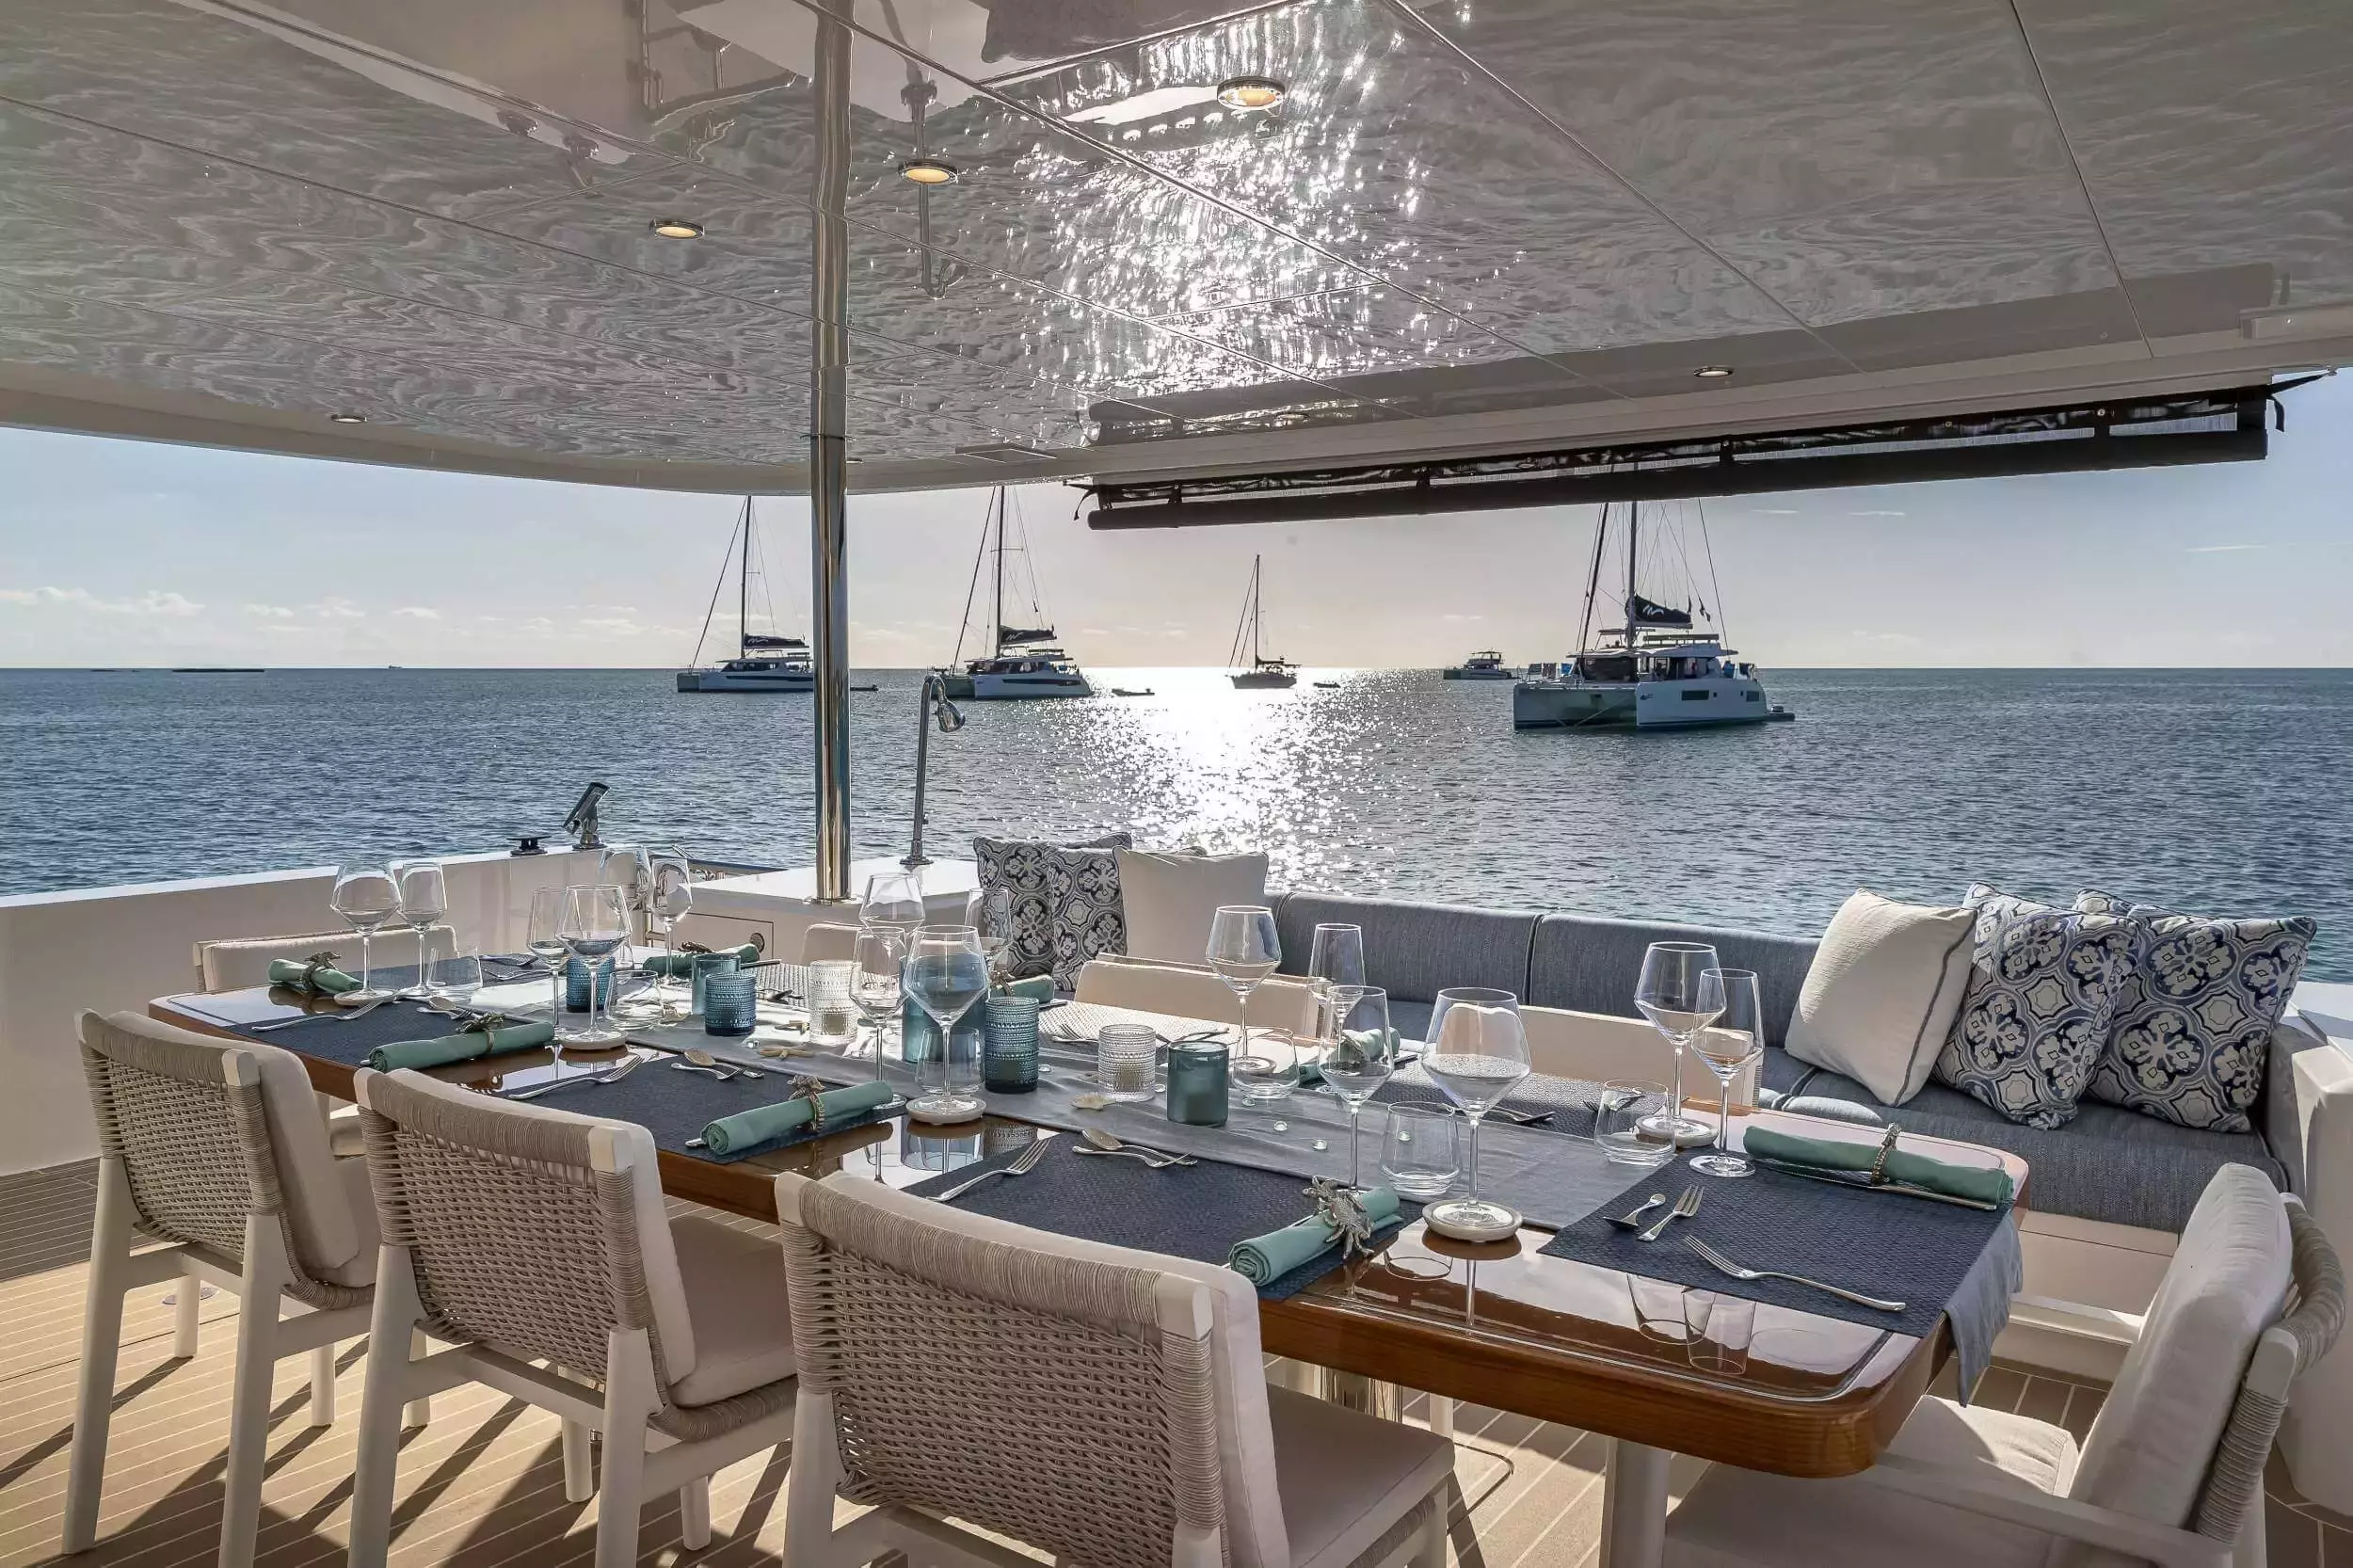 Omakase by Horizon - Top rates for a Charter of a private Power Catamaran in Puerto Rico